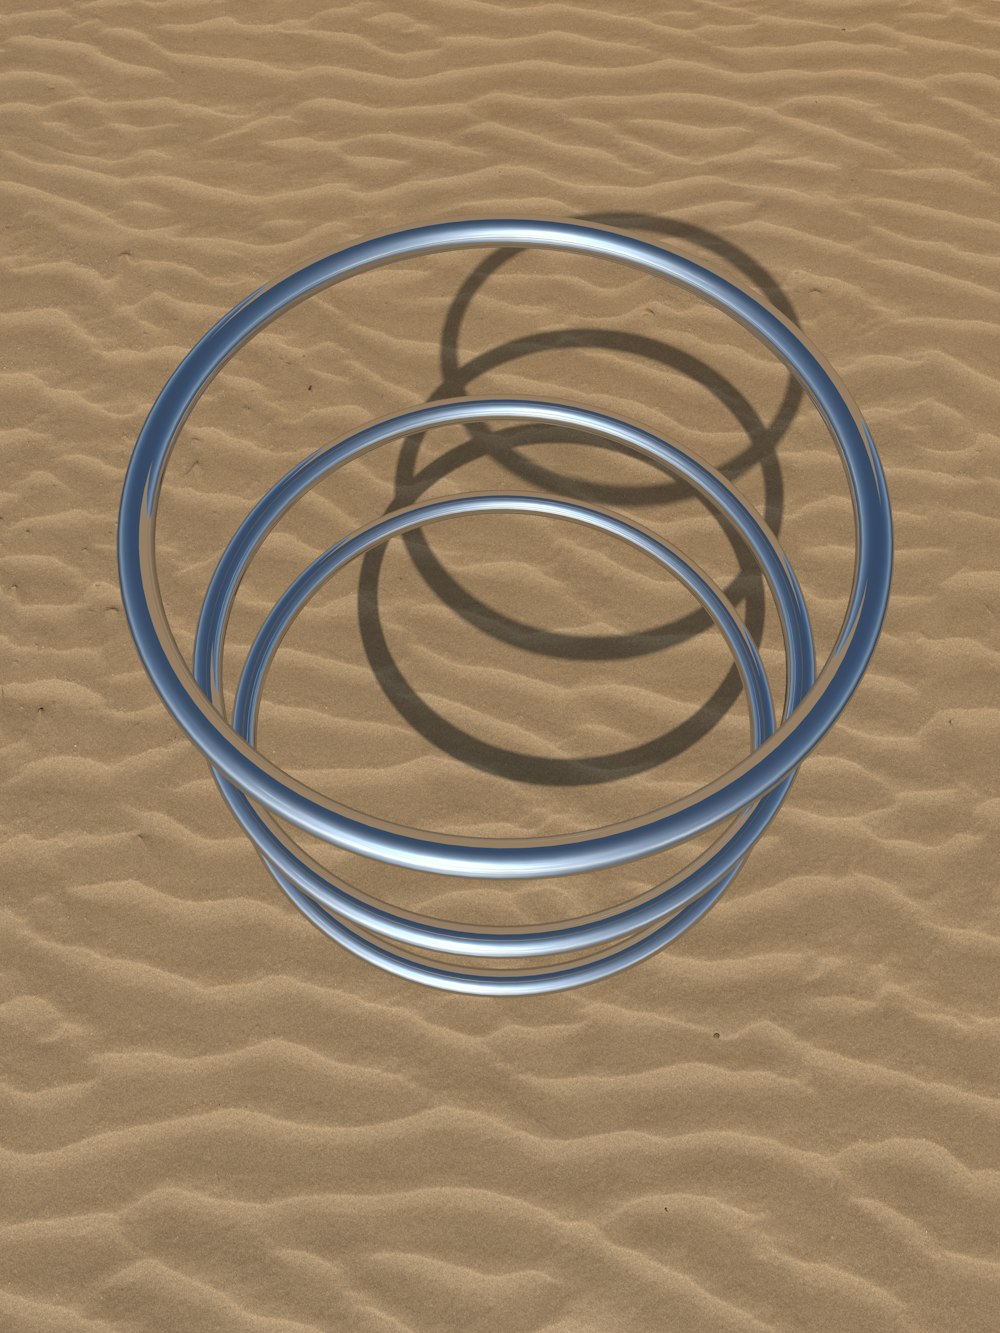 a group of metal rings sitting on top of a sandy beach